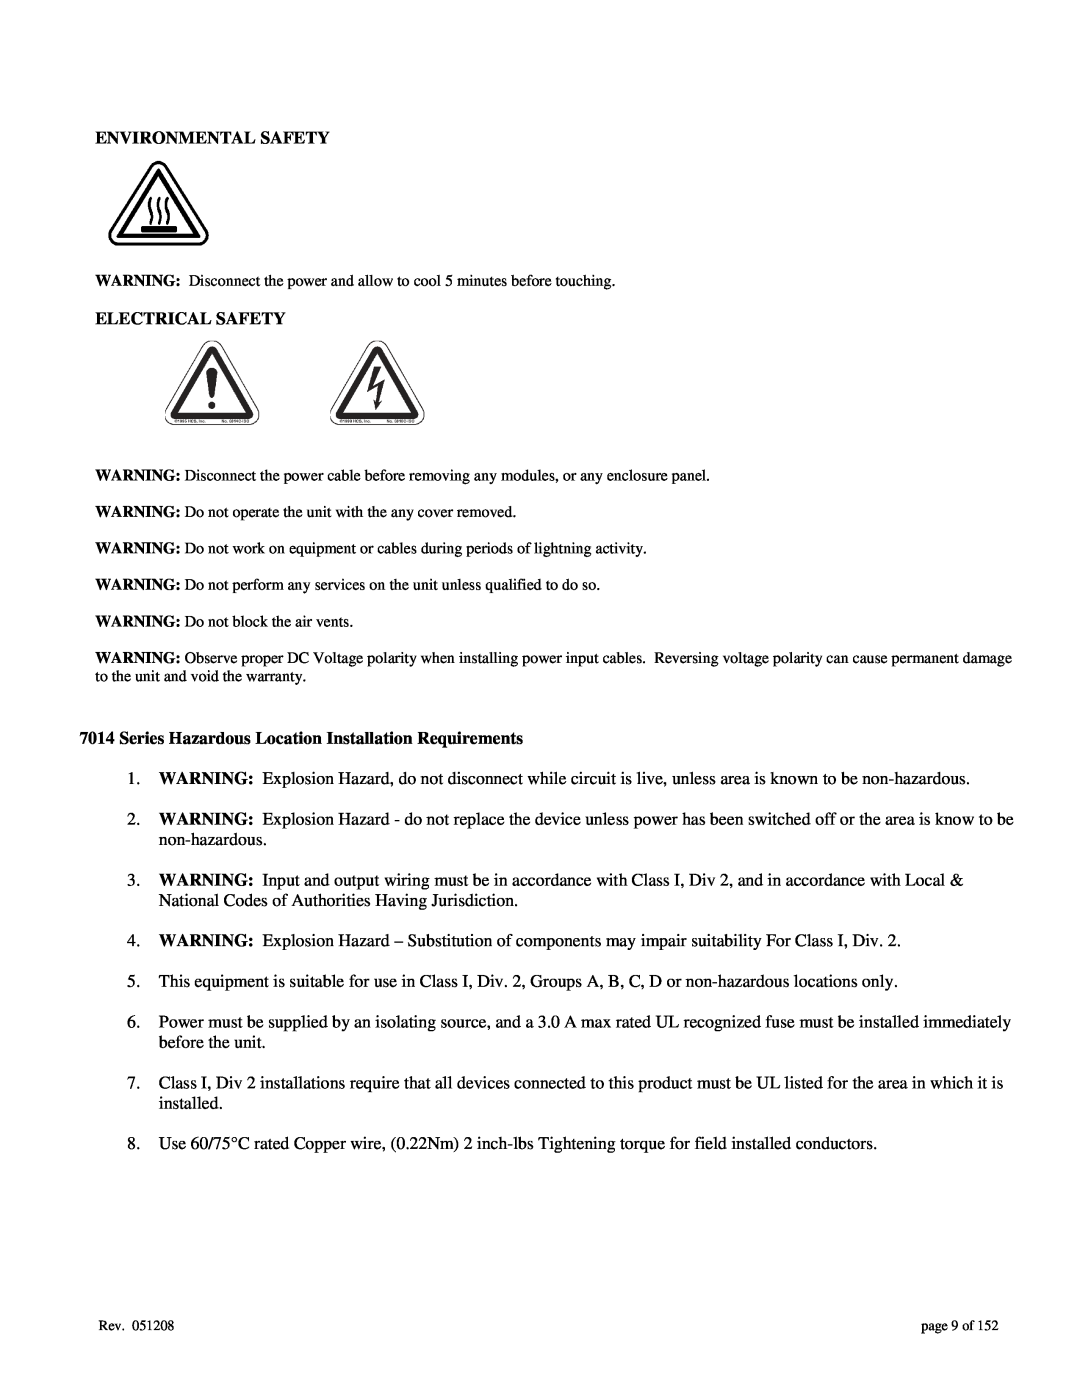 Gigabyte 7014 user manual Environmental Safety, Electrical Safety, Series Hazardous Location Installation Requirements 